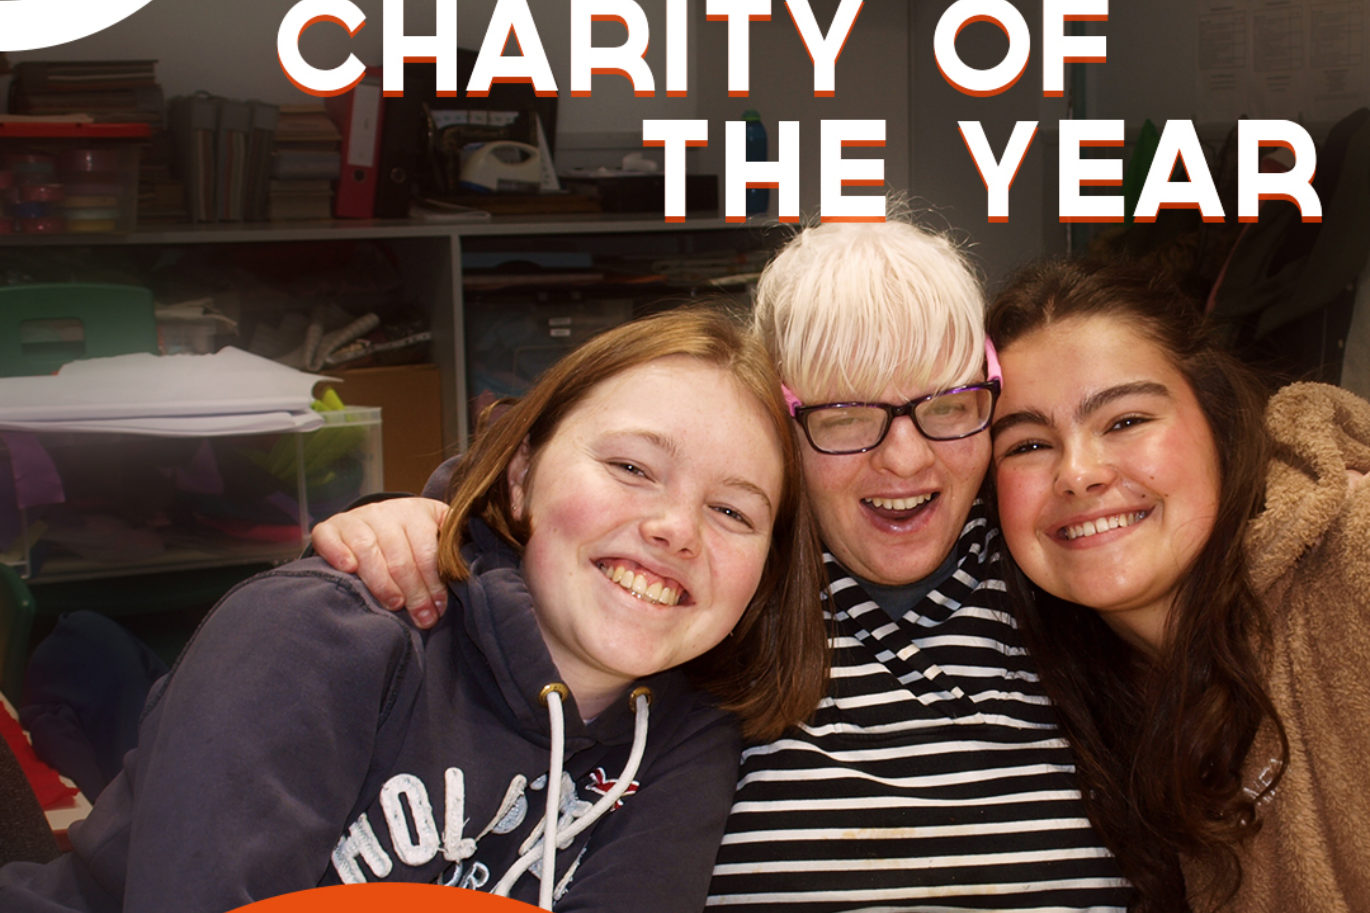 Charity of the Year by CitNOW Group - Charity of the Year by CitNOW Group